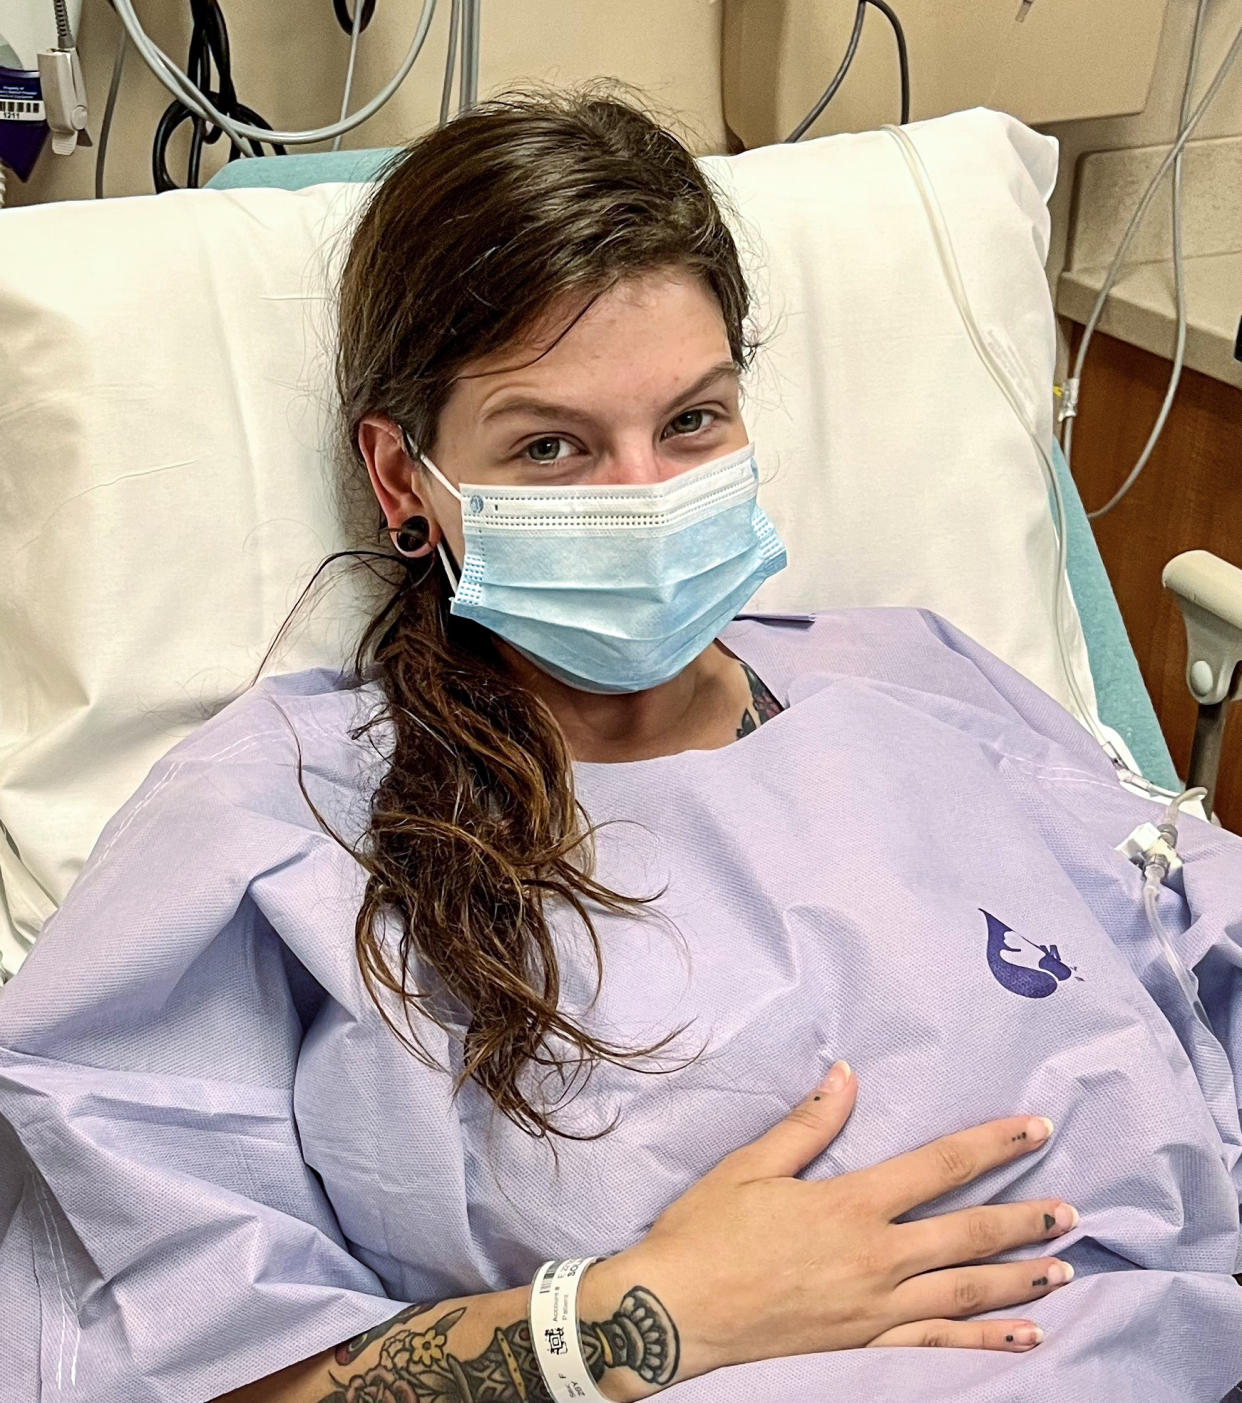 Megan Solan scheduled her salpingectomy, the surgical removal of fallopian tubes, after the draft decision of Roe being overturned was leaked. (Courtesy Megan Solan)